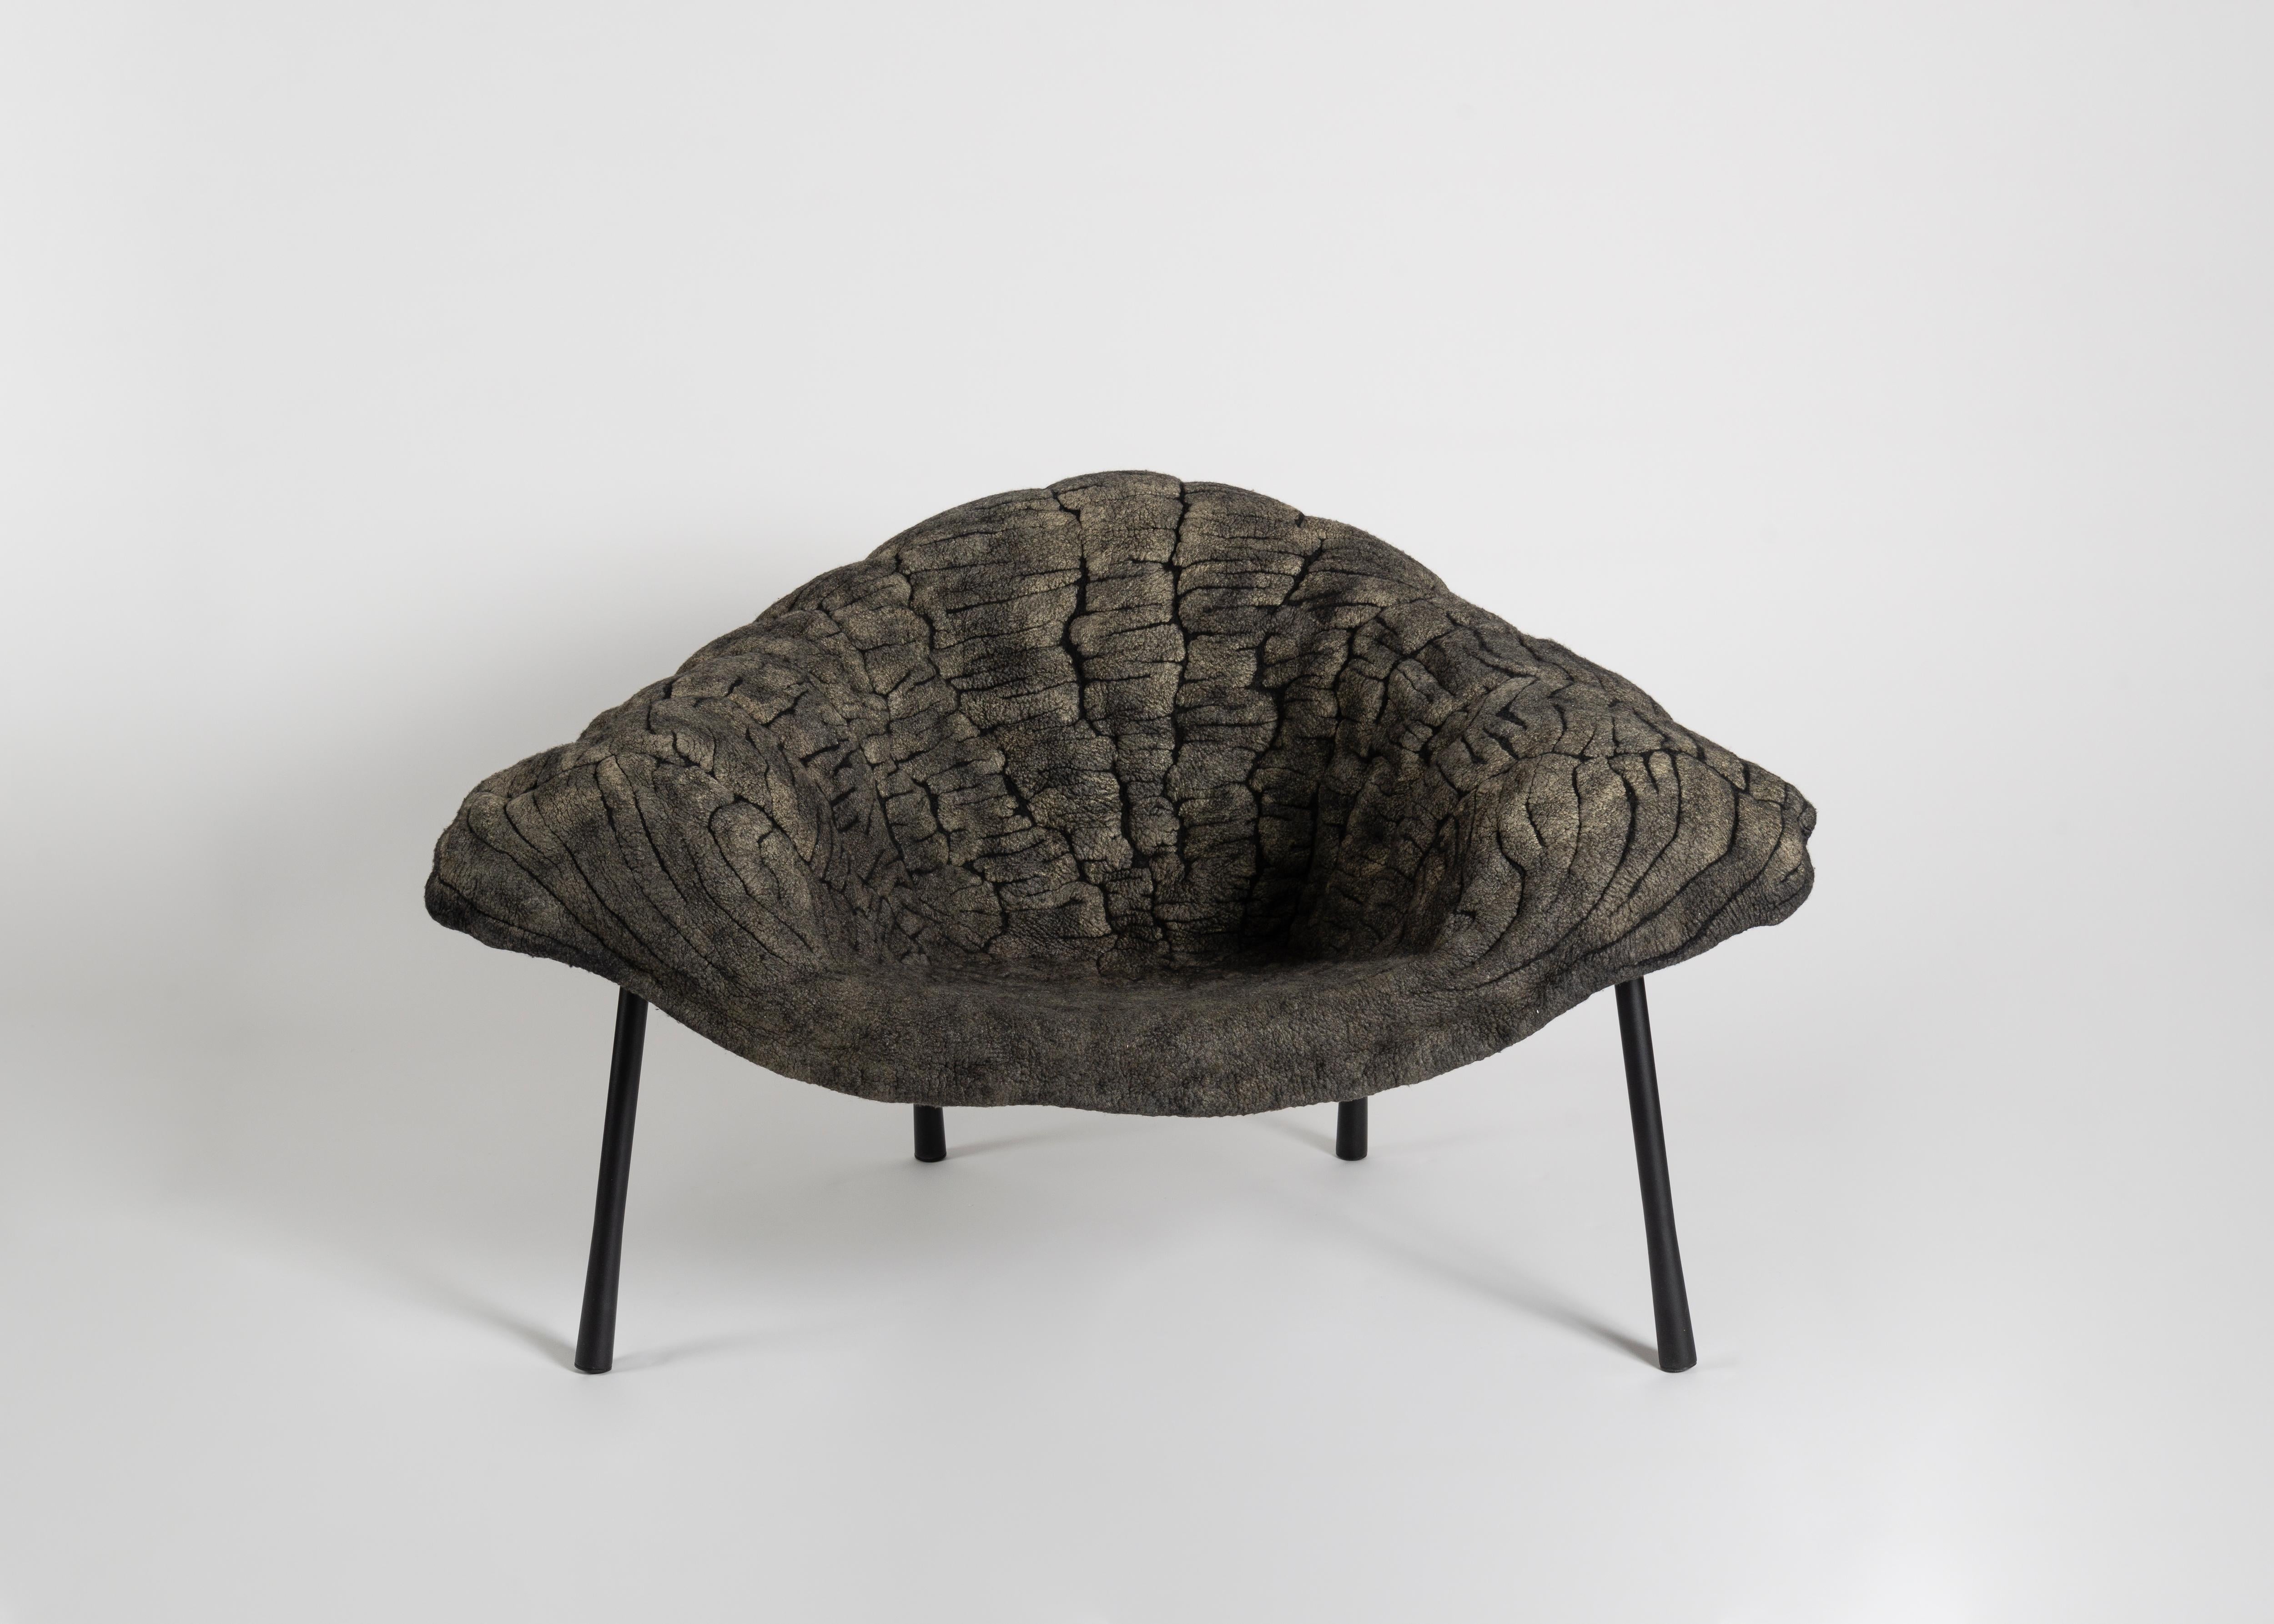 The upholstery of this chair is made of finely woven layers of felt and mimics forms in nature like seabed coral or crystalline rocks, which develop over years of growth or accretion. This new design by Ayala Serfaty, with its abstract, natural